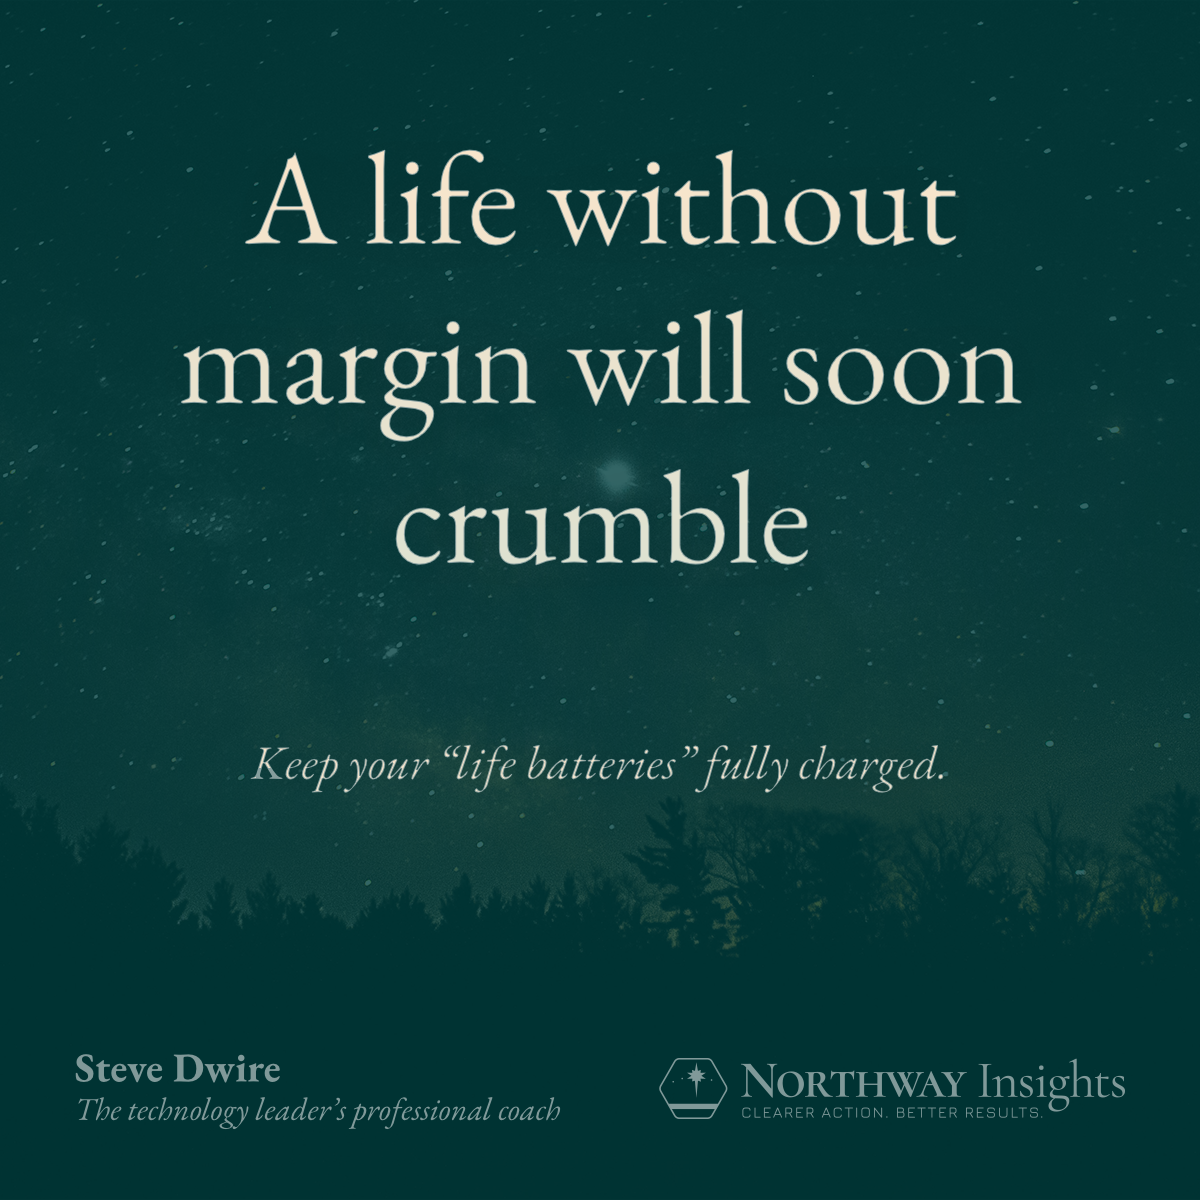 A life without margin will soon crumble. Keep your "life batteries" fully charged.